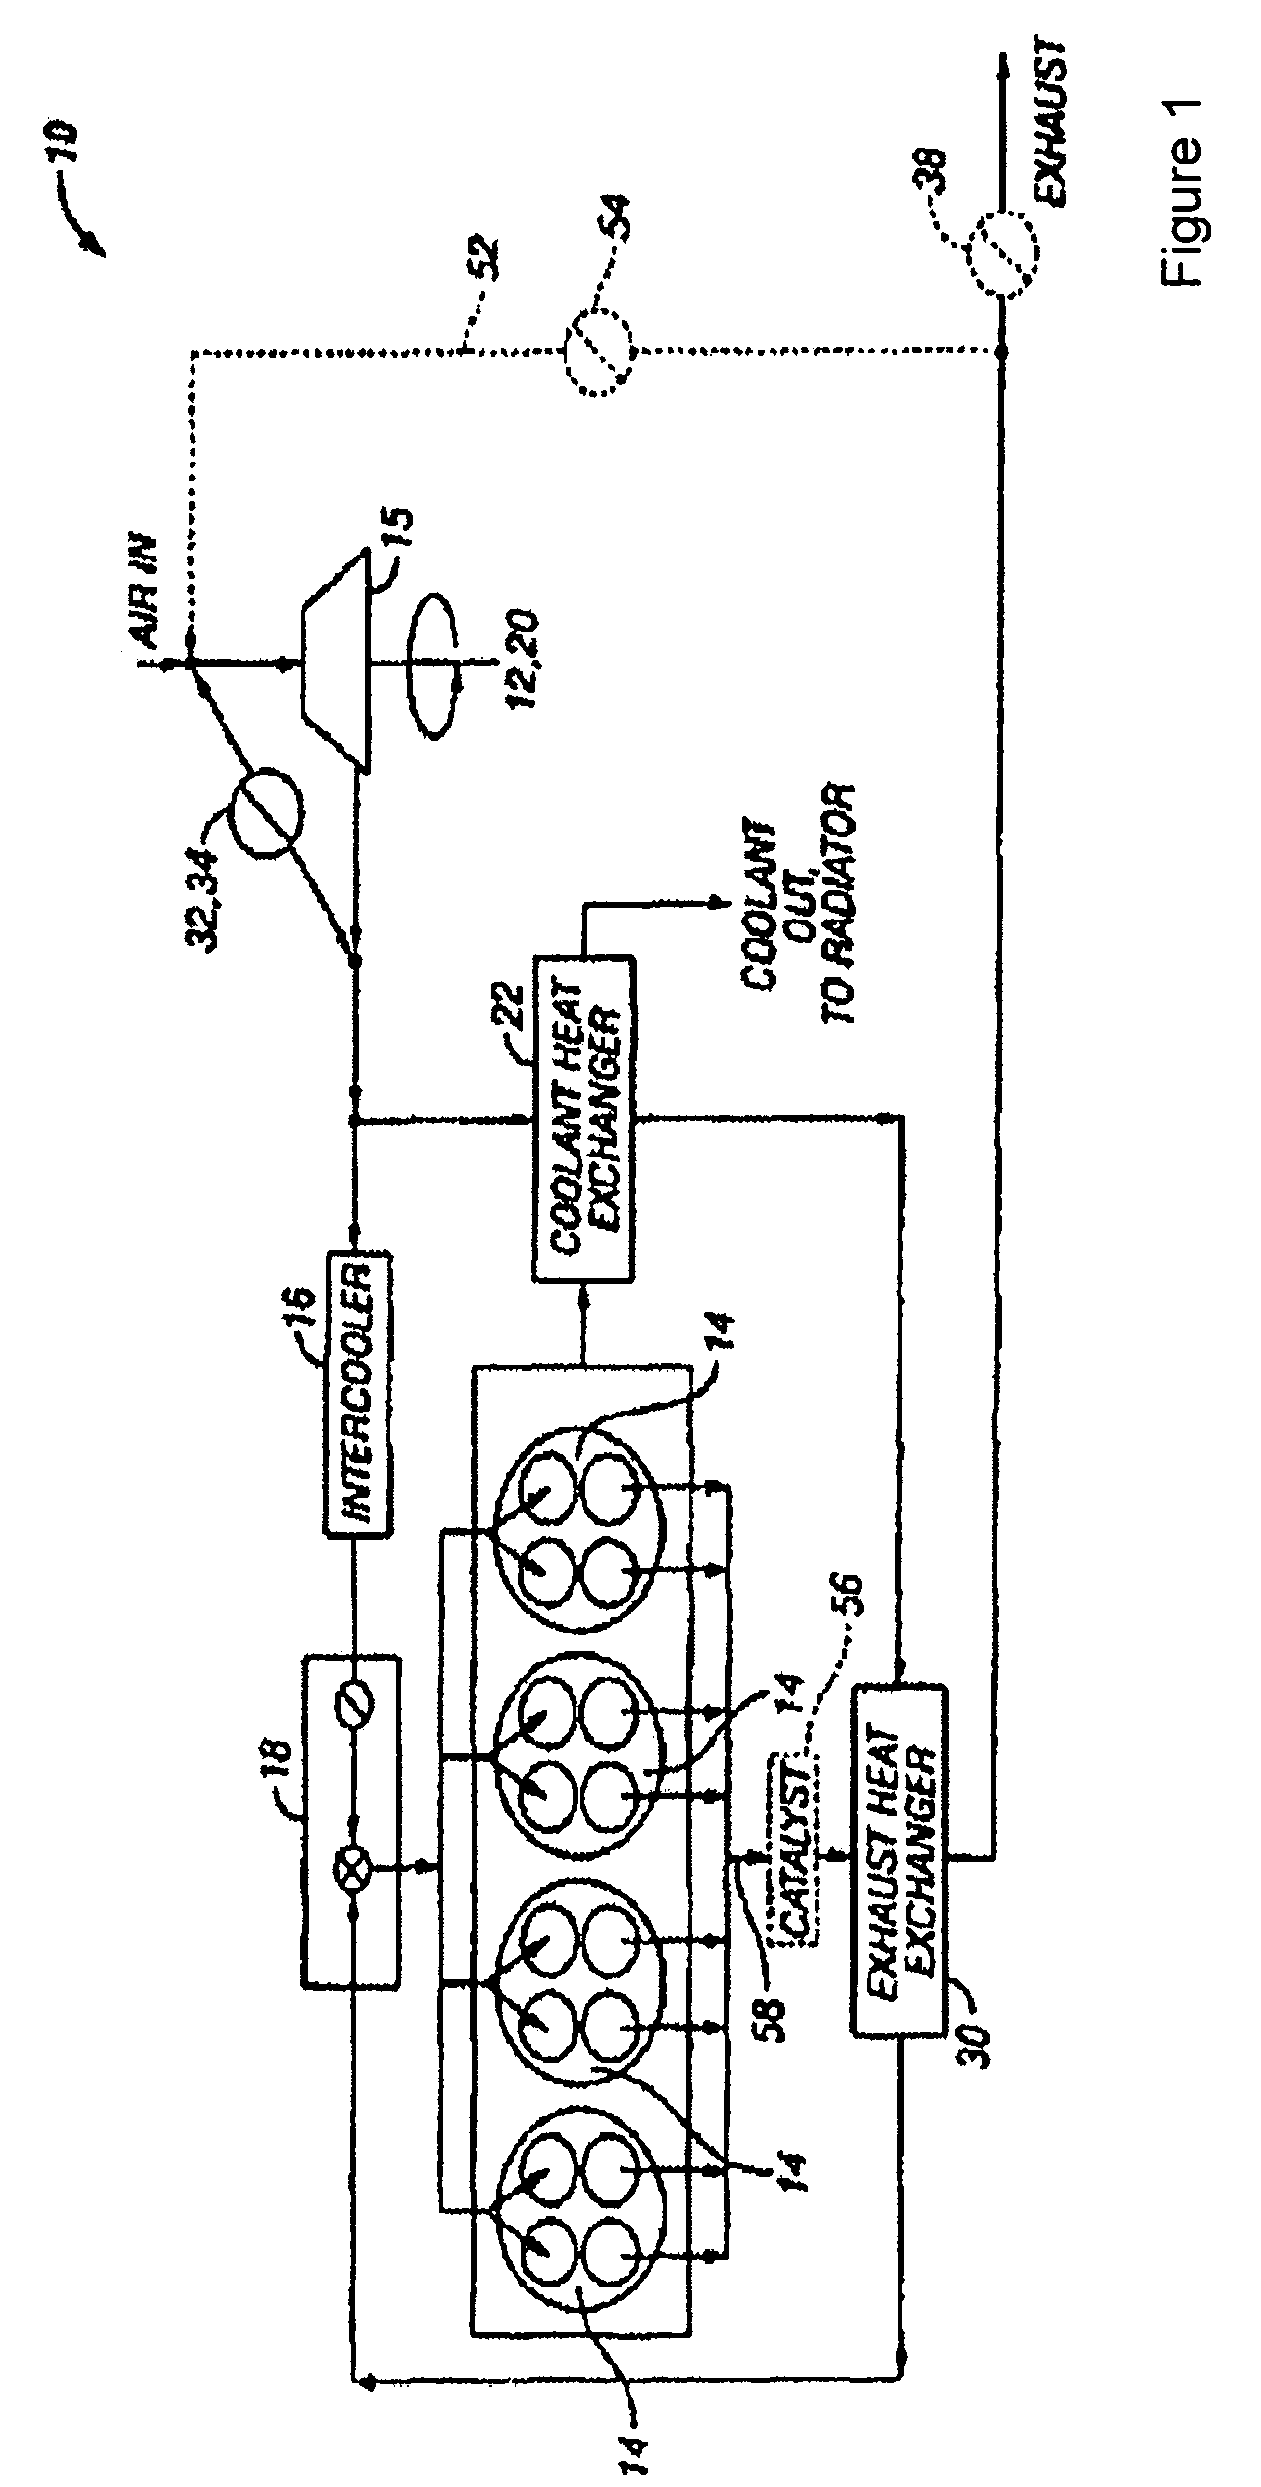 System and method for improved engine starting using heated intake air